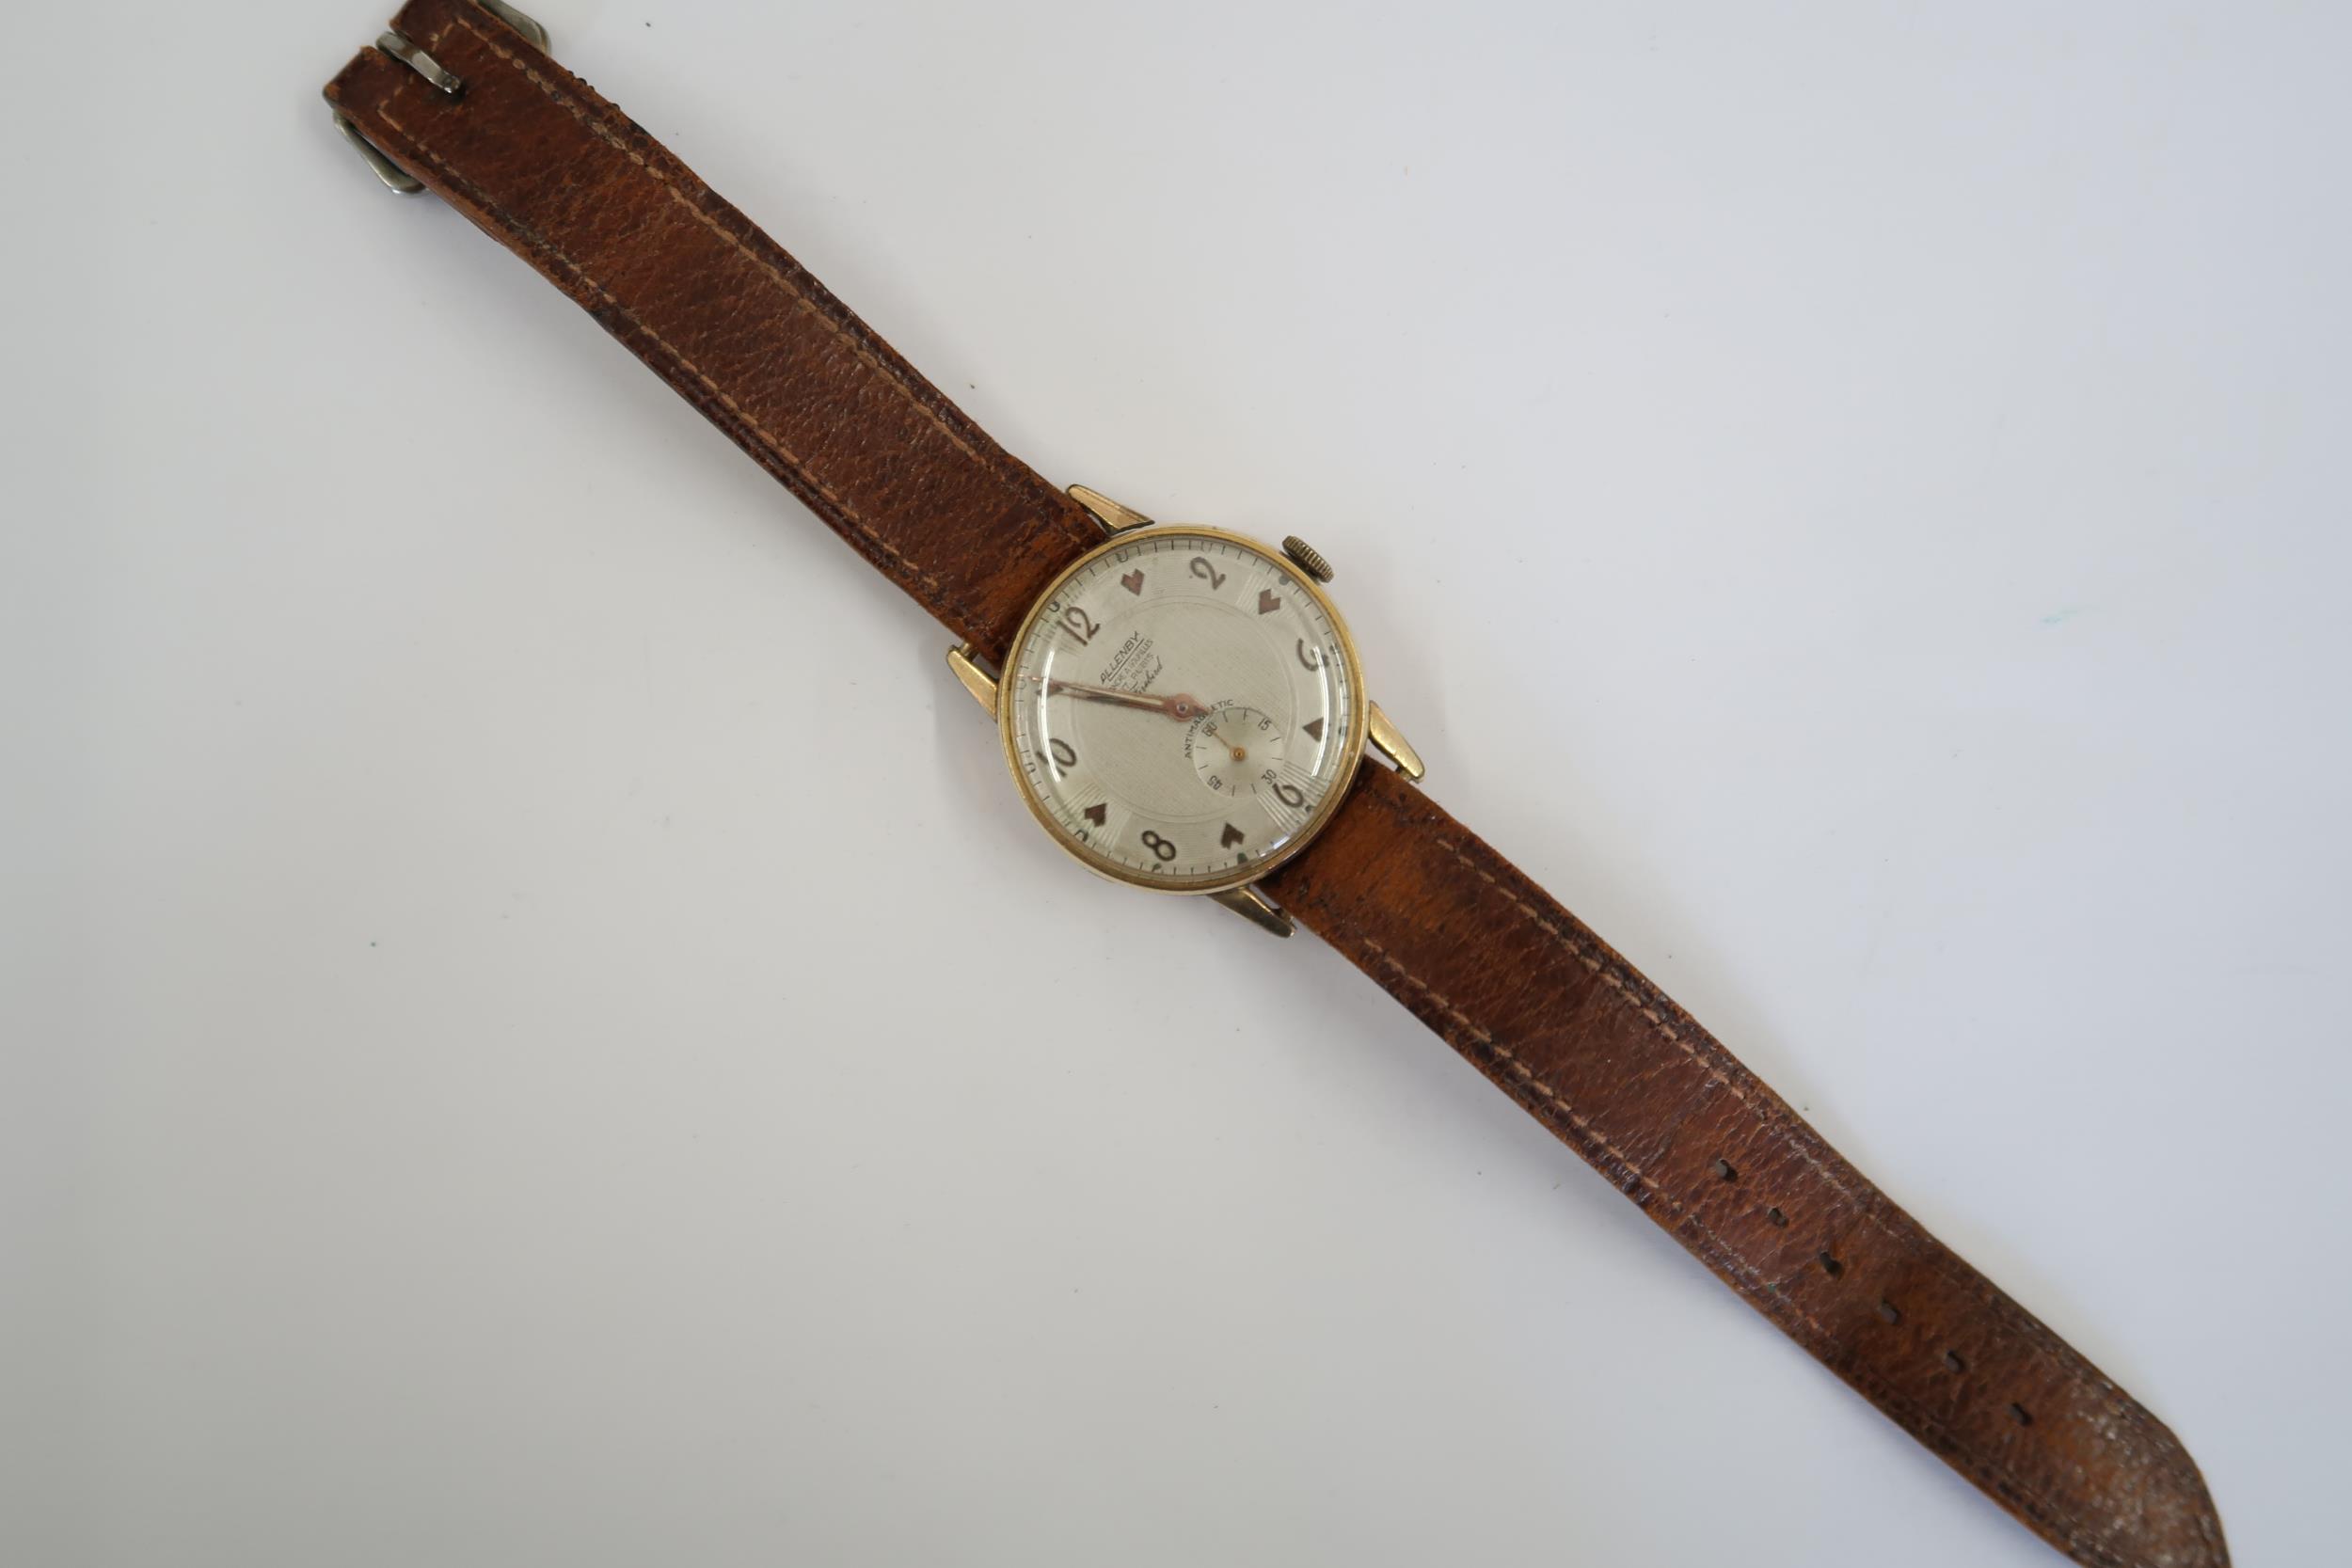 A Gents Allenby automatic watch on a brown leather strap, running in saleroom - Image 3 of 3